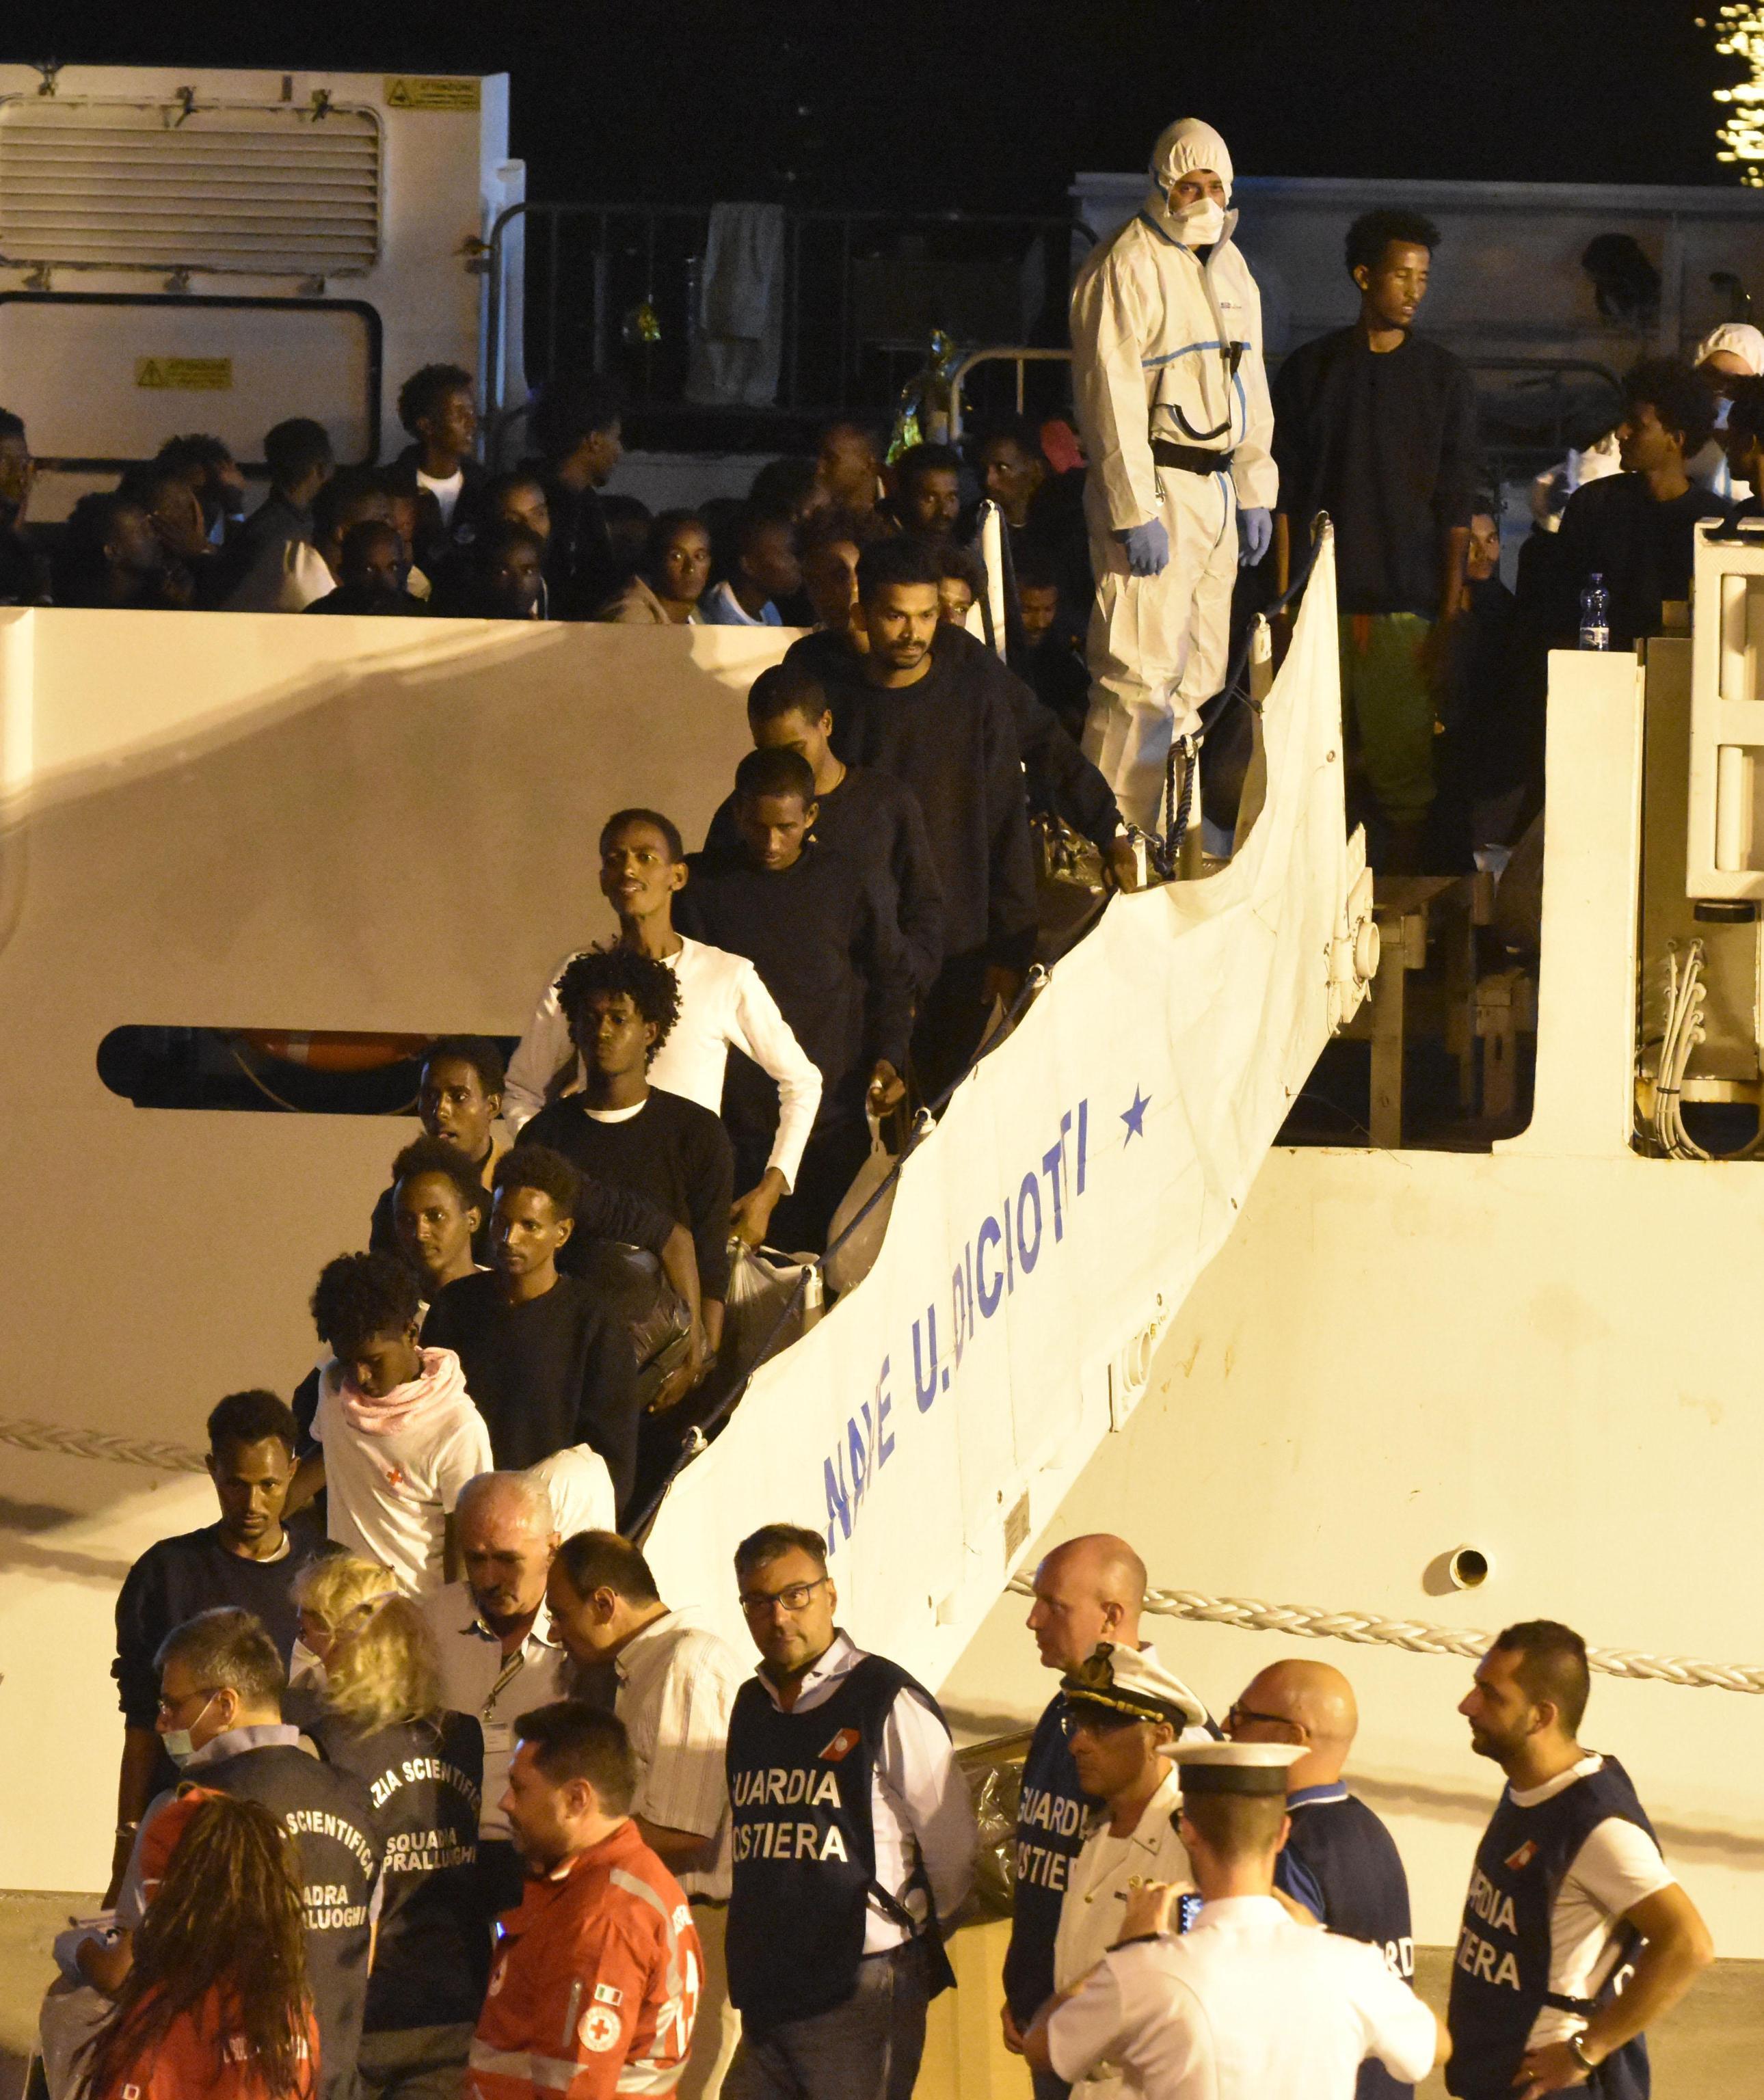 Migrants disembark from the ship